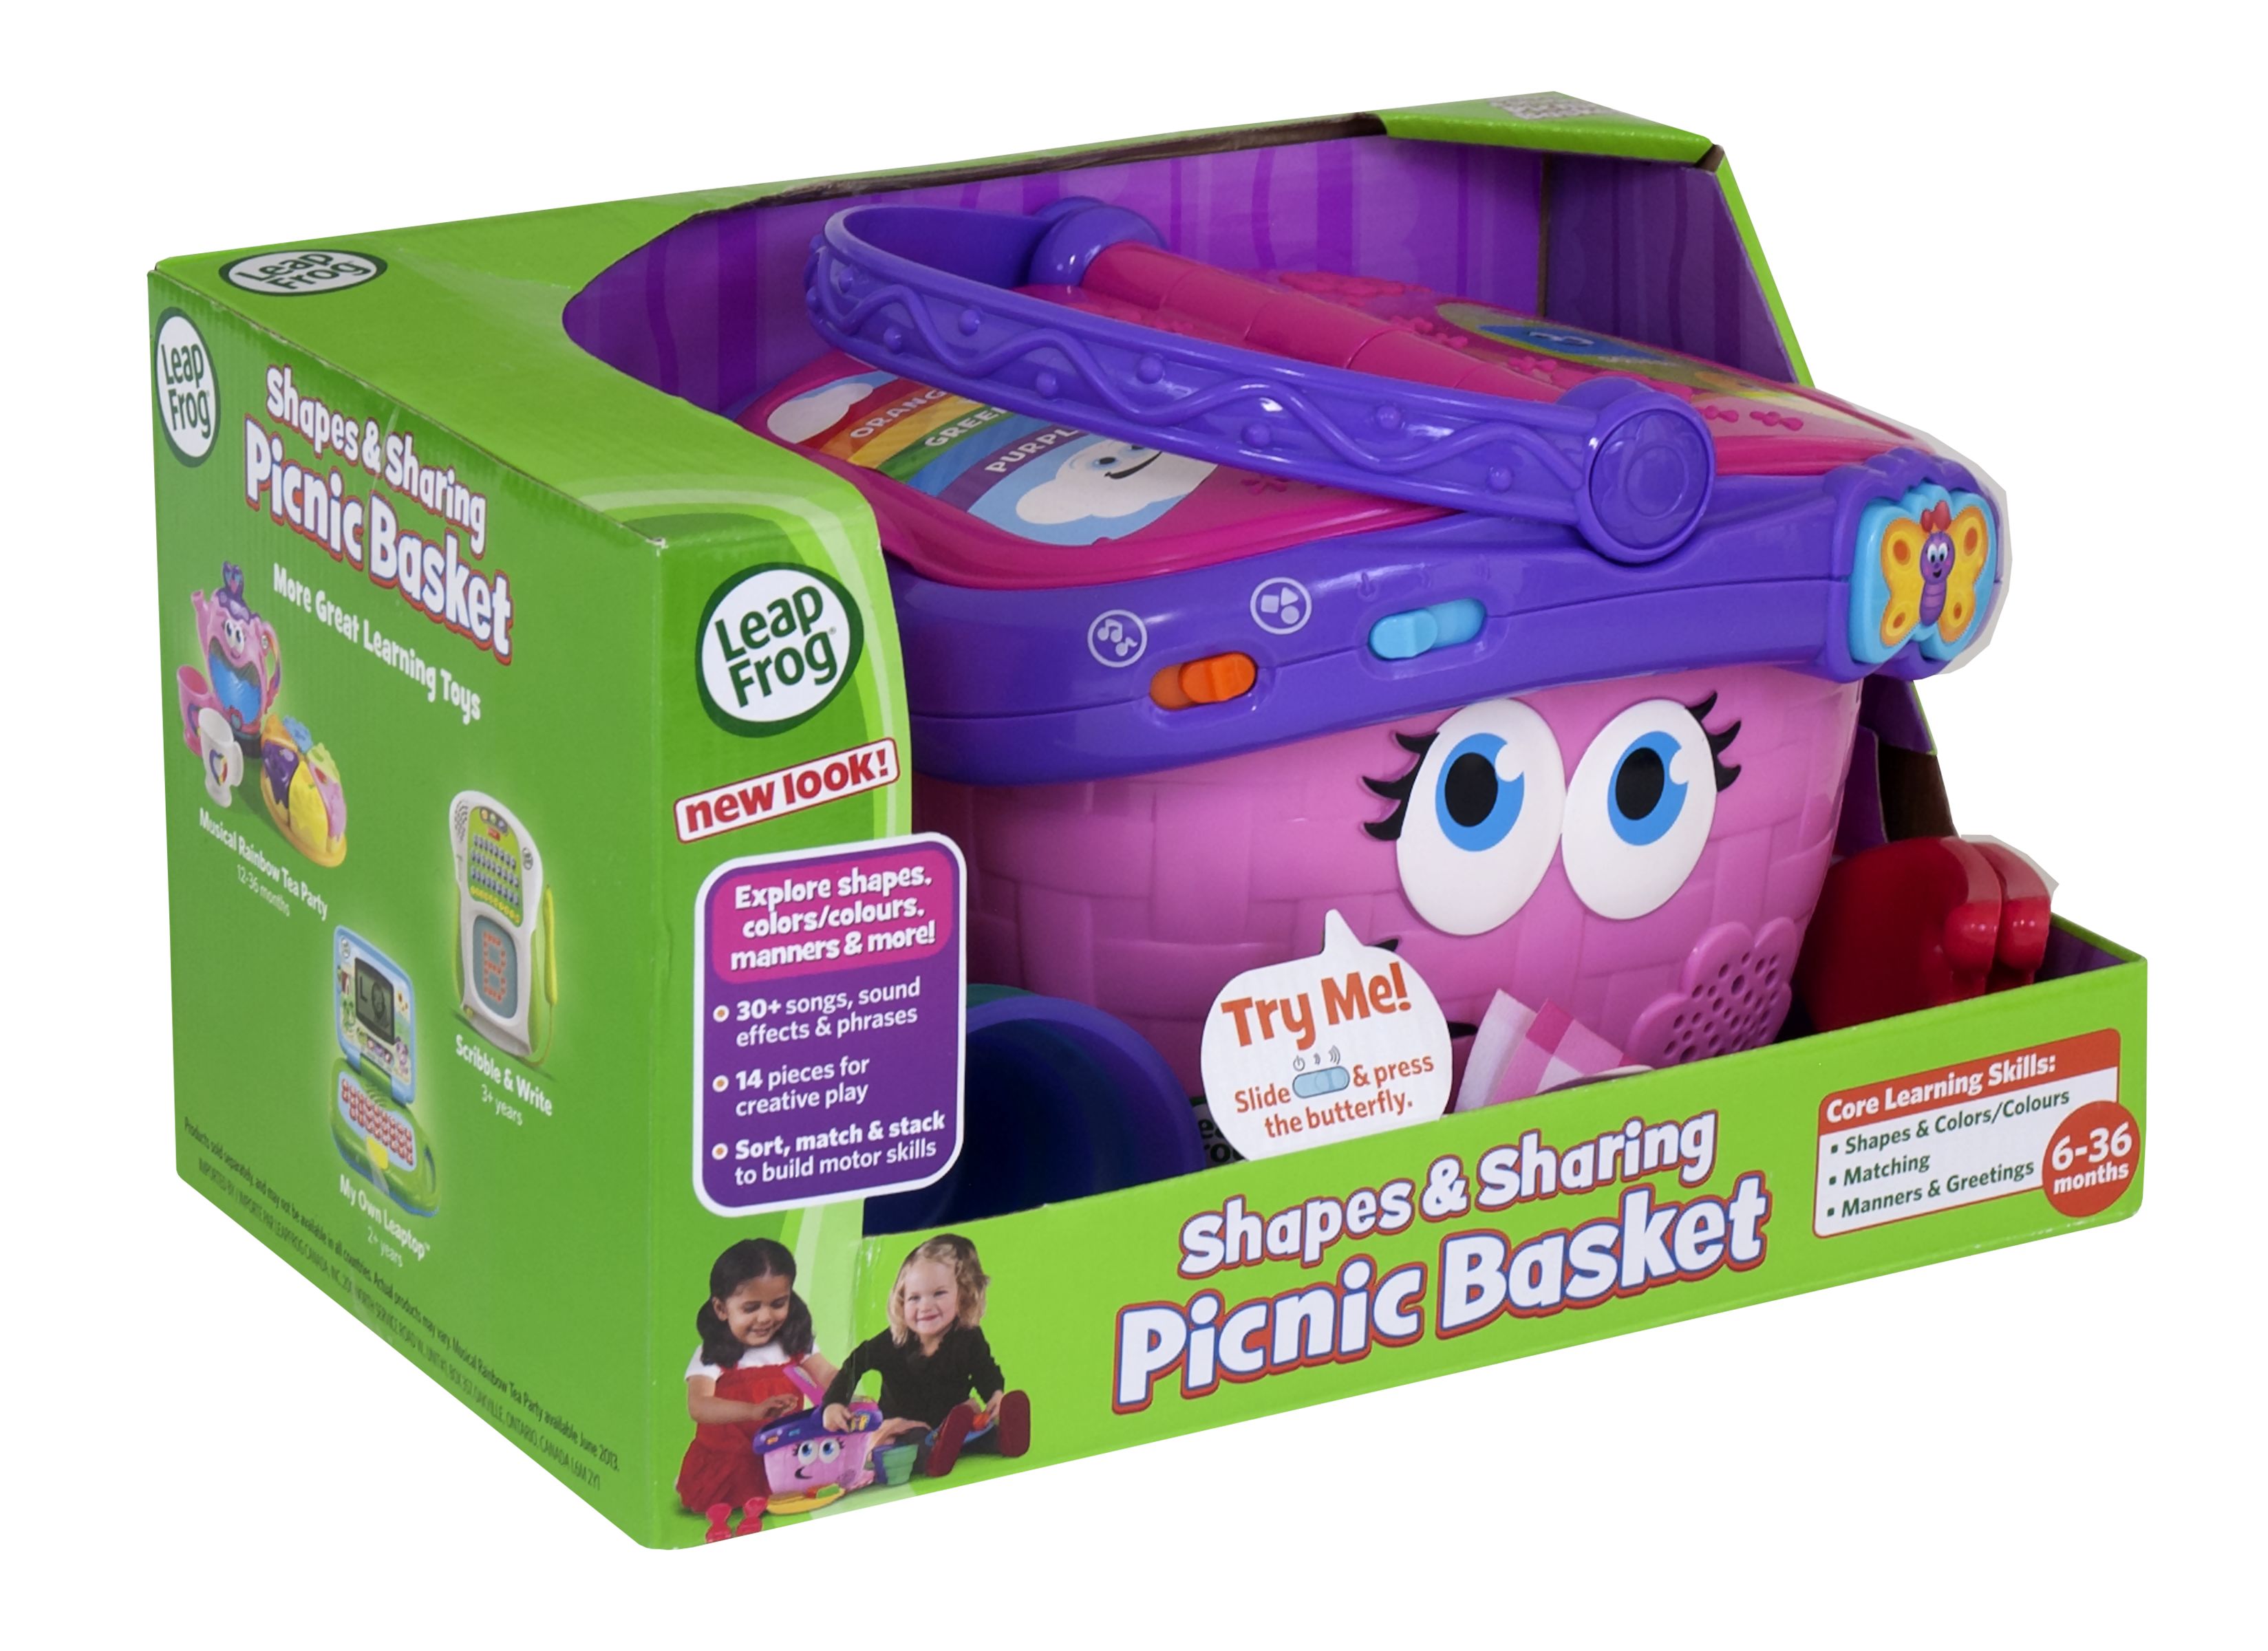 LeapFrog Shapes and Sharing Picnic Basket, Role-Play Toy for Kids - image 5 of 6